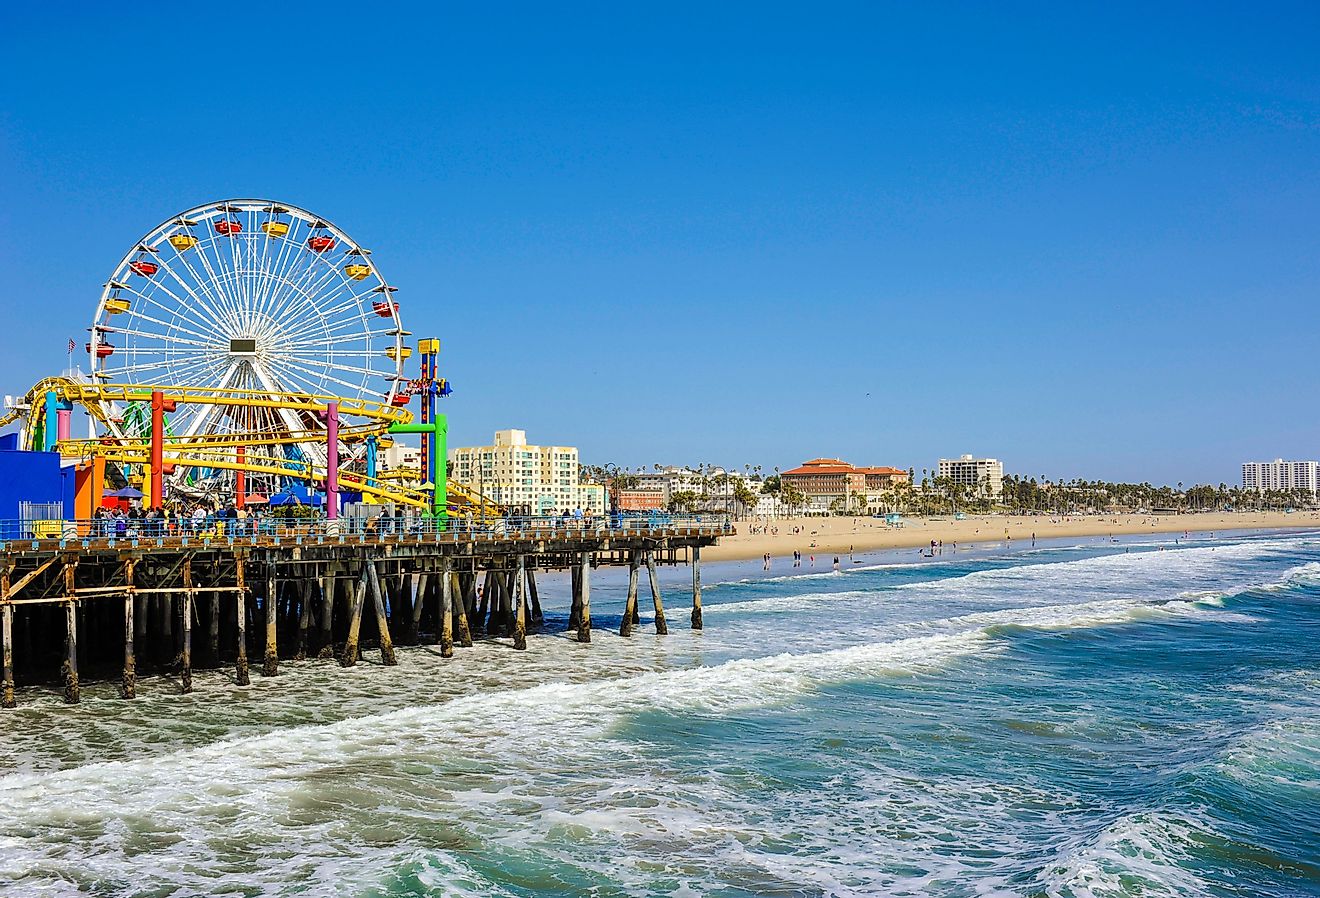 View of the Santa Monica pier in California, which features an amusement park and beach. Image credit Mark and Anna Photography via Shutterstock.